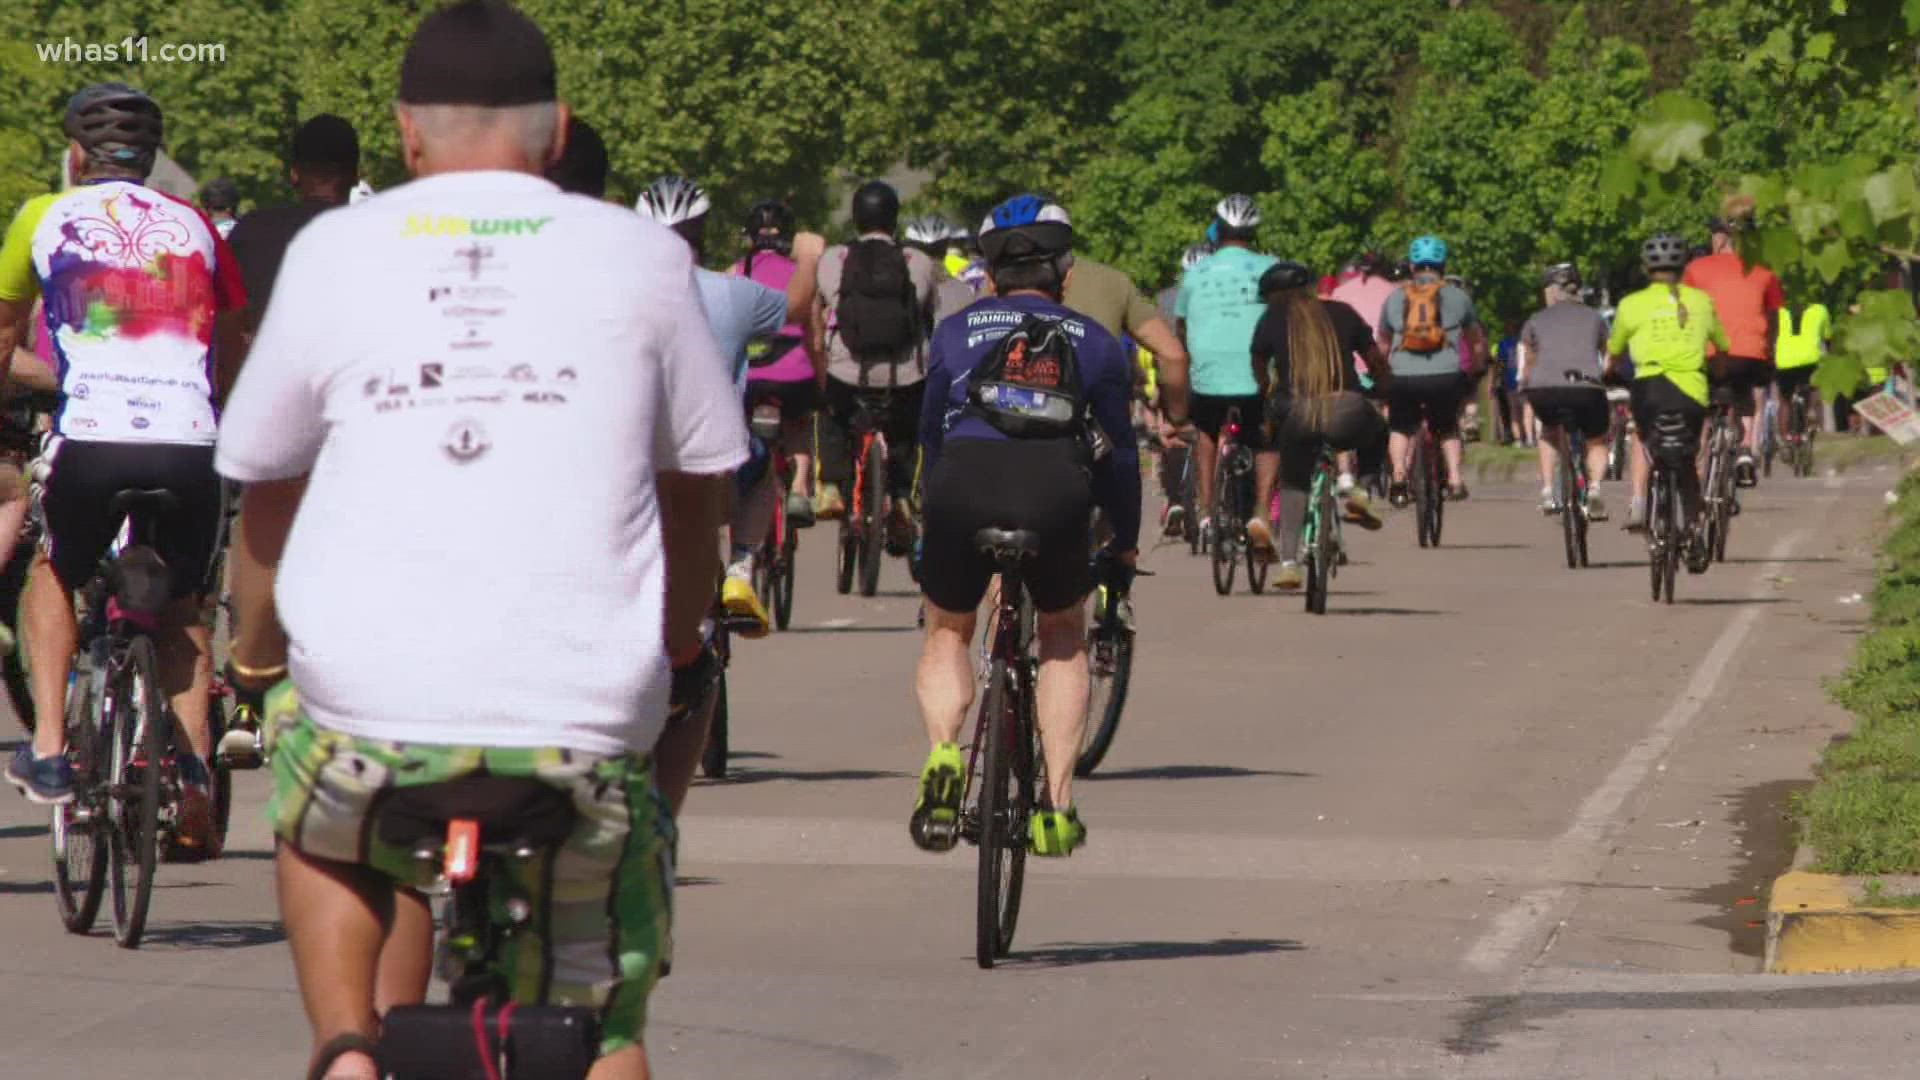 This year's event featured a 13-mile bike ride from the Boathouse Lawn to Shawnee Park, walk options and a paddle route up the river to Beargrass Creek.